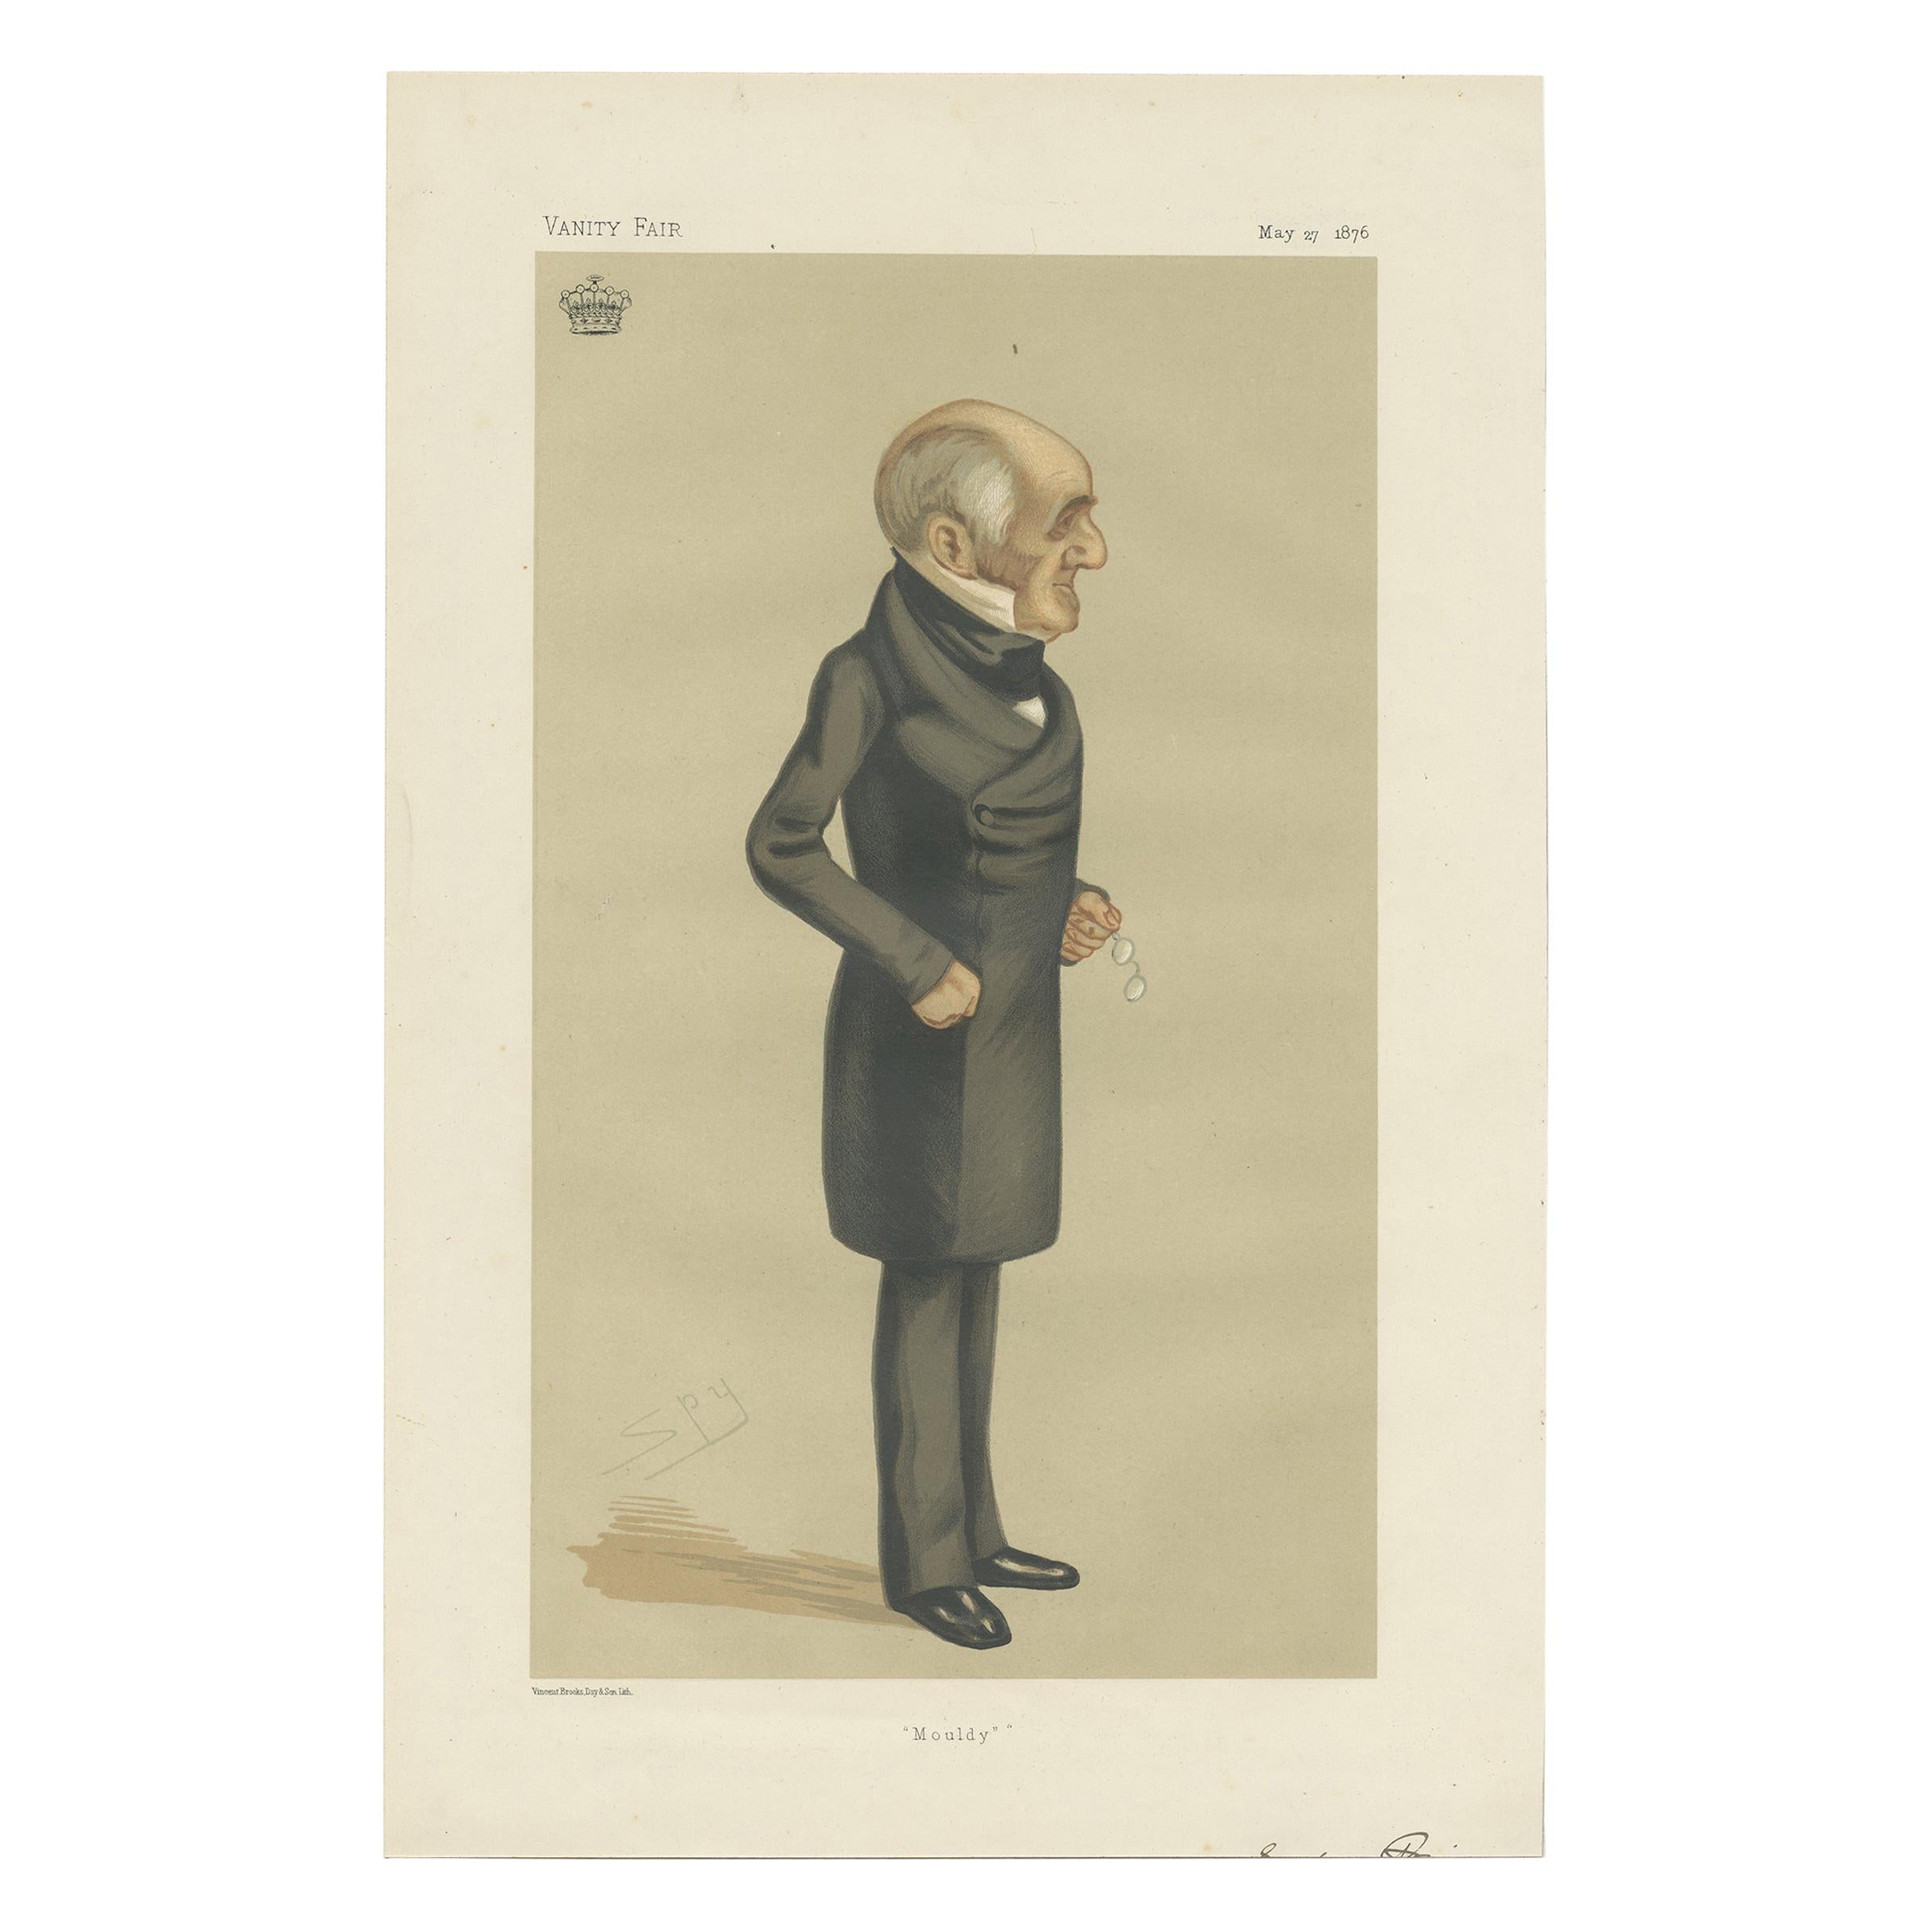 Antique Print of the Earl of Powis Published in the Vanity Fair, 1876